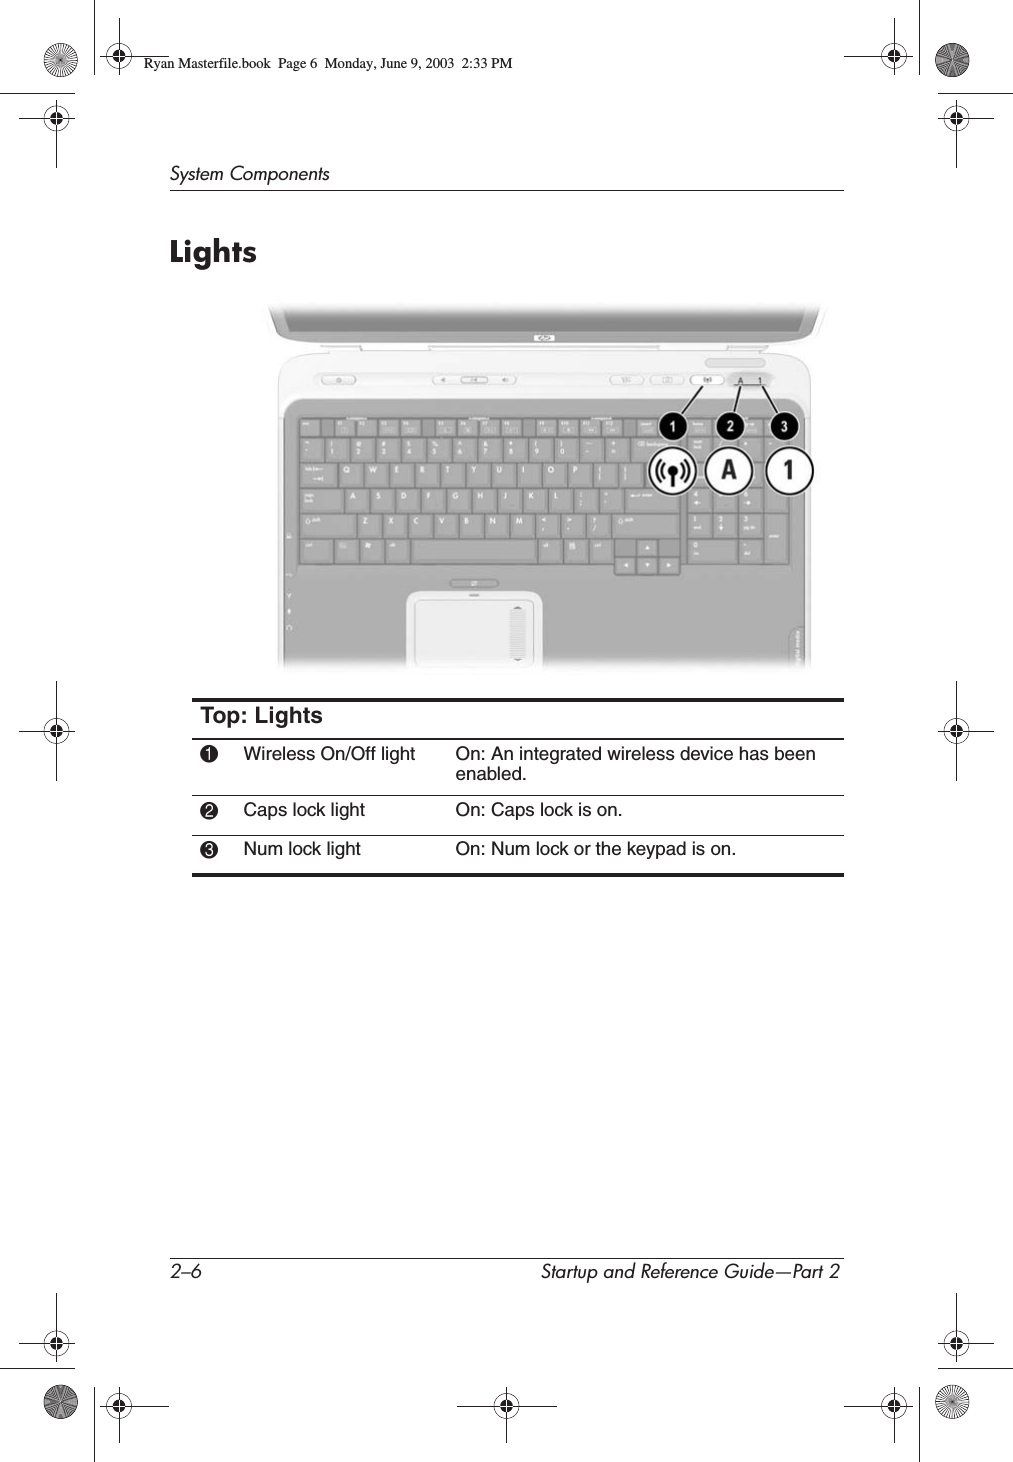 2–6 Startup and Reference Guide—Part 2System ComponentsLightsTop: Lights1Wireless On/Off light On: An integrated wireless device has been enabled.2Caps lock light On: Caps lock is on.3Num lock light On: Num lock or the keypad is on.Ryan Masterfile.book  Page 6  Monday, June 9, 2003  2:33 PM